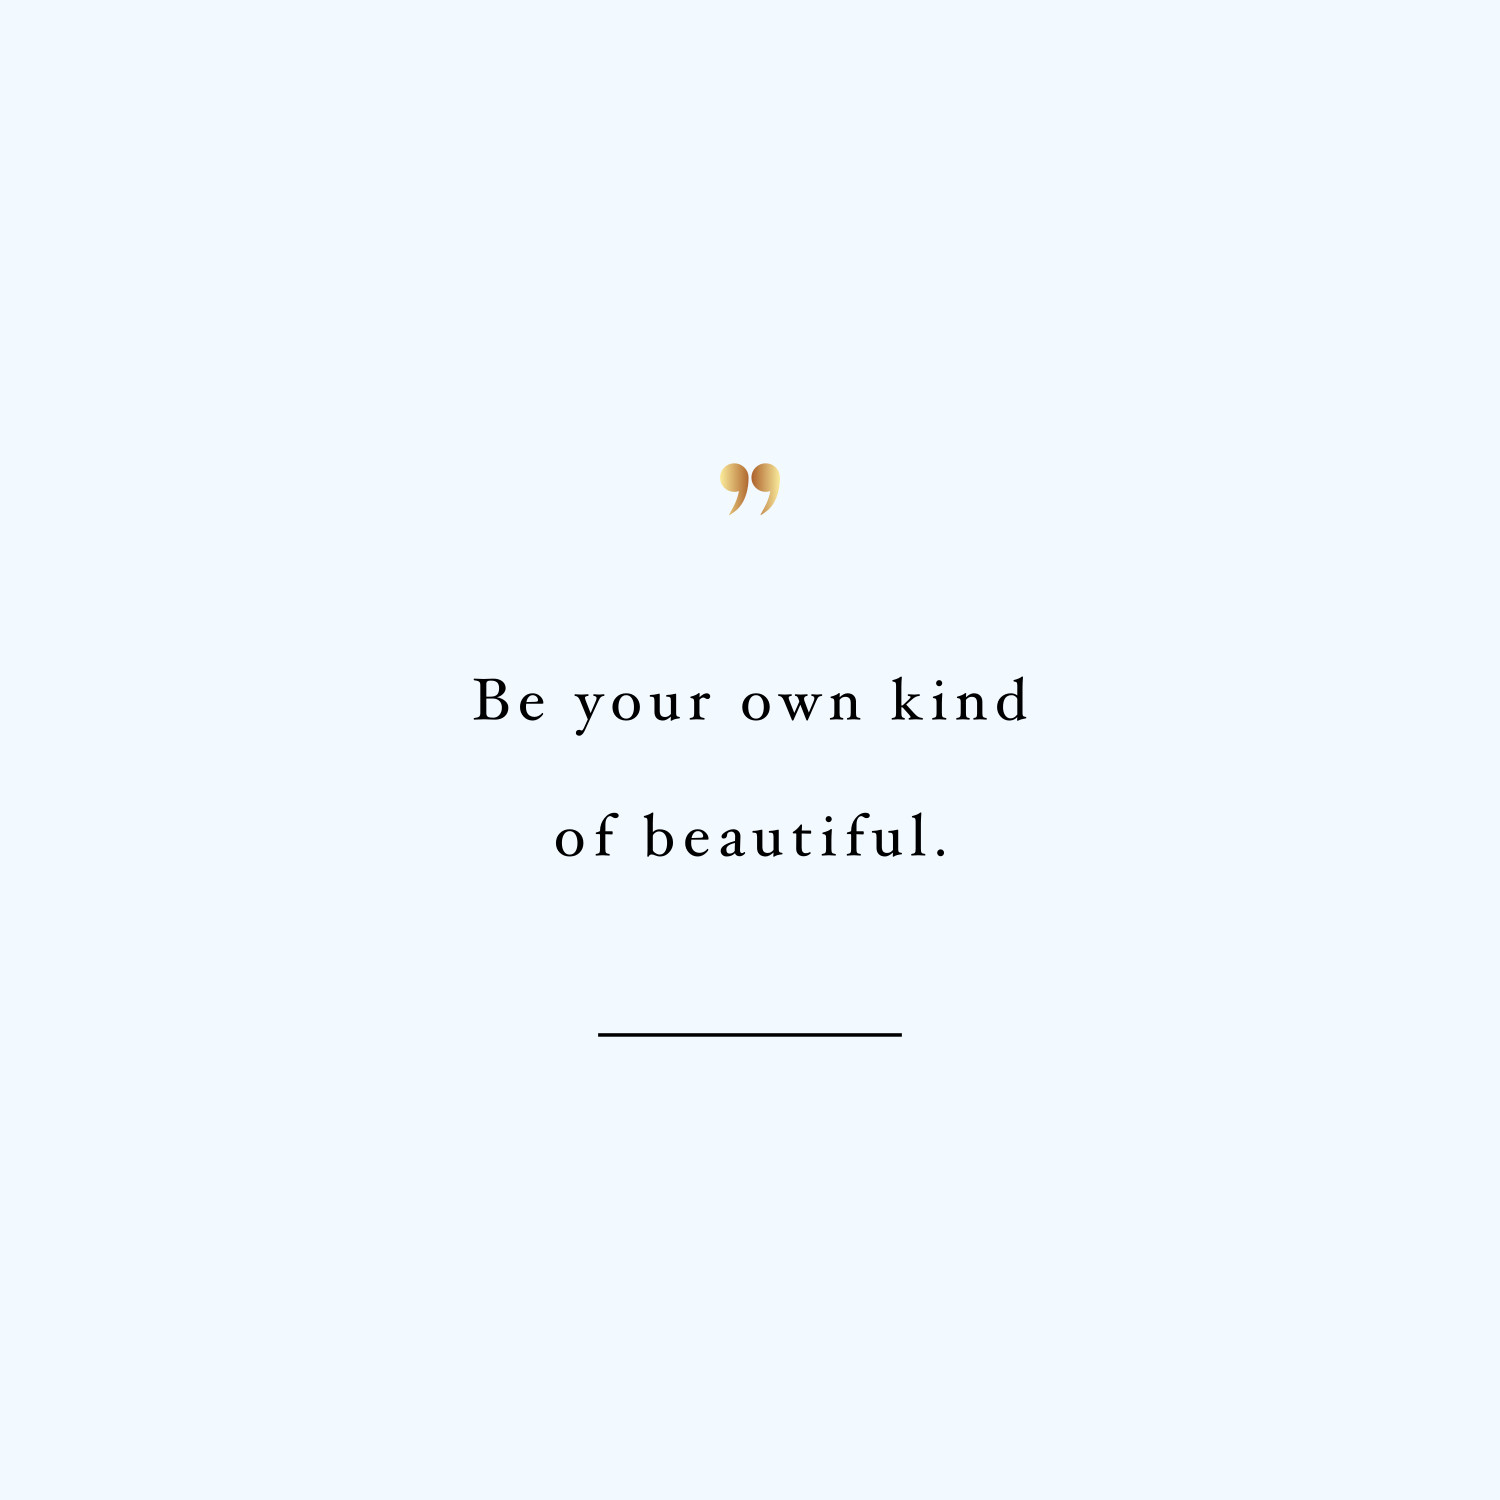 Be your own kind of beautiful! Browse our collection of inspirational wellness and fitness quotes and get instant training and weight loss motivation. Transform positive thoughts into positive actions and get fit, healthy and happy! https://www.spotebi.com/workout-motivation/be-your-own-kind-of-beautiful/